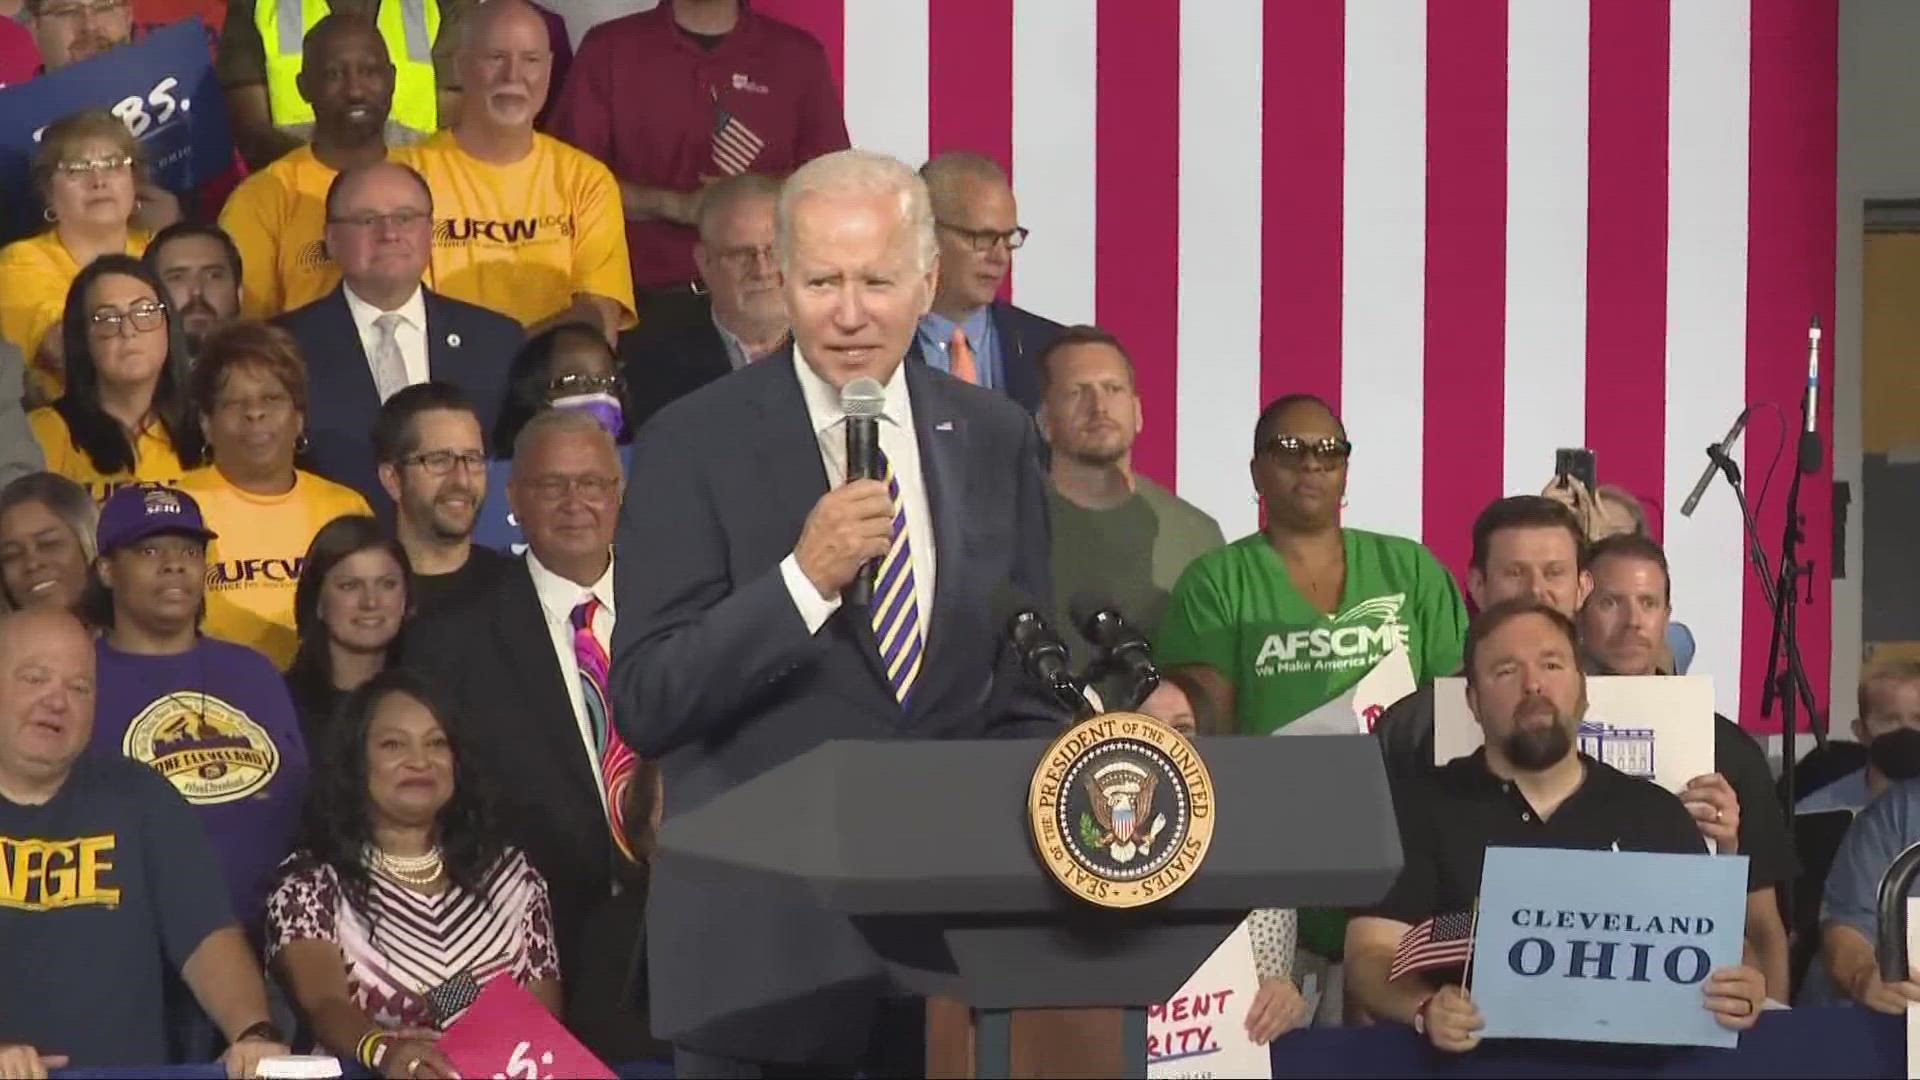 President Biden landed in Cleveland around 1:50 p.m. Wednesday afternoon and gave a speech at  Max S. Hayes High School.